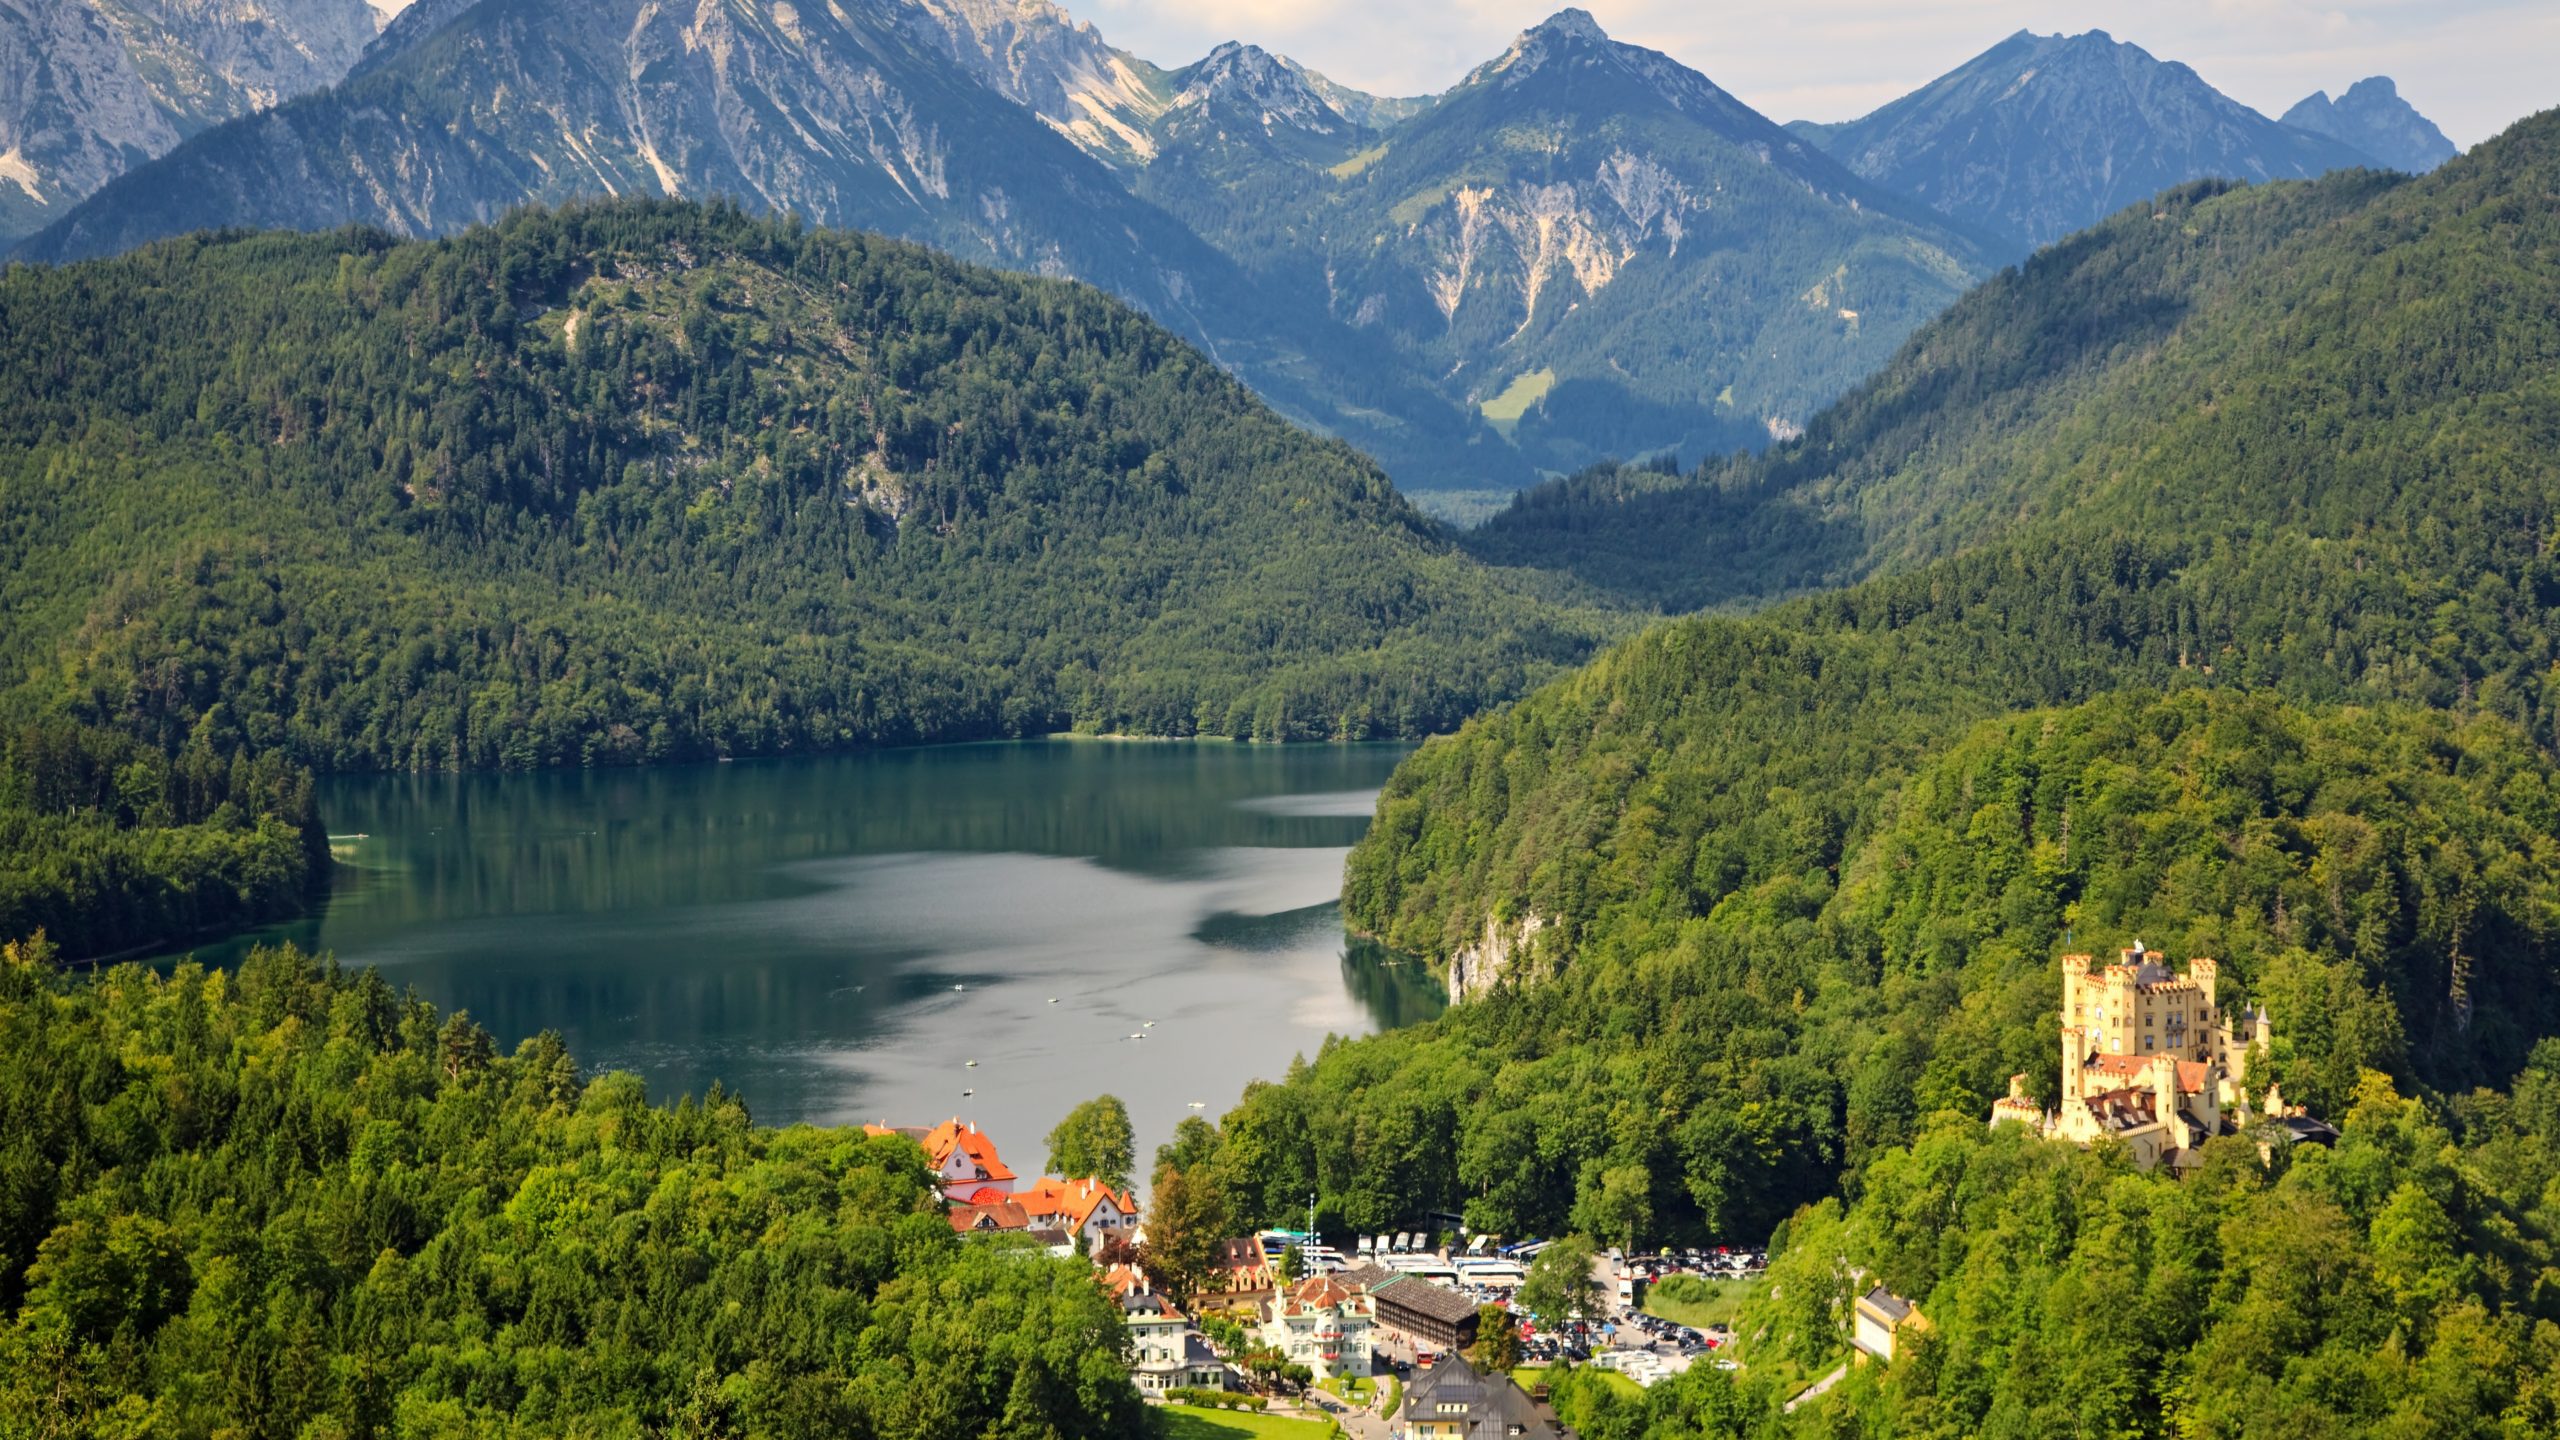 Ninth thing on the list of 10 best things to do in Germany - Explore the Bavarian Alps